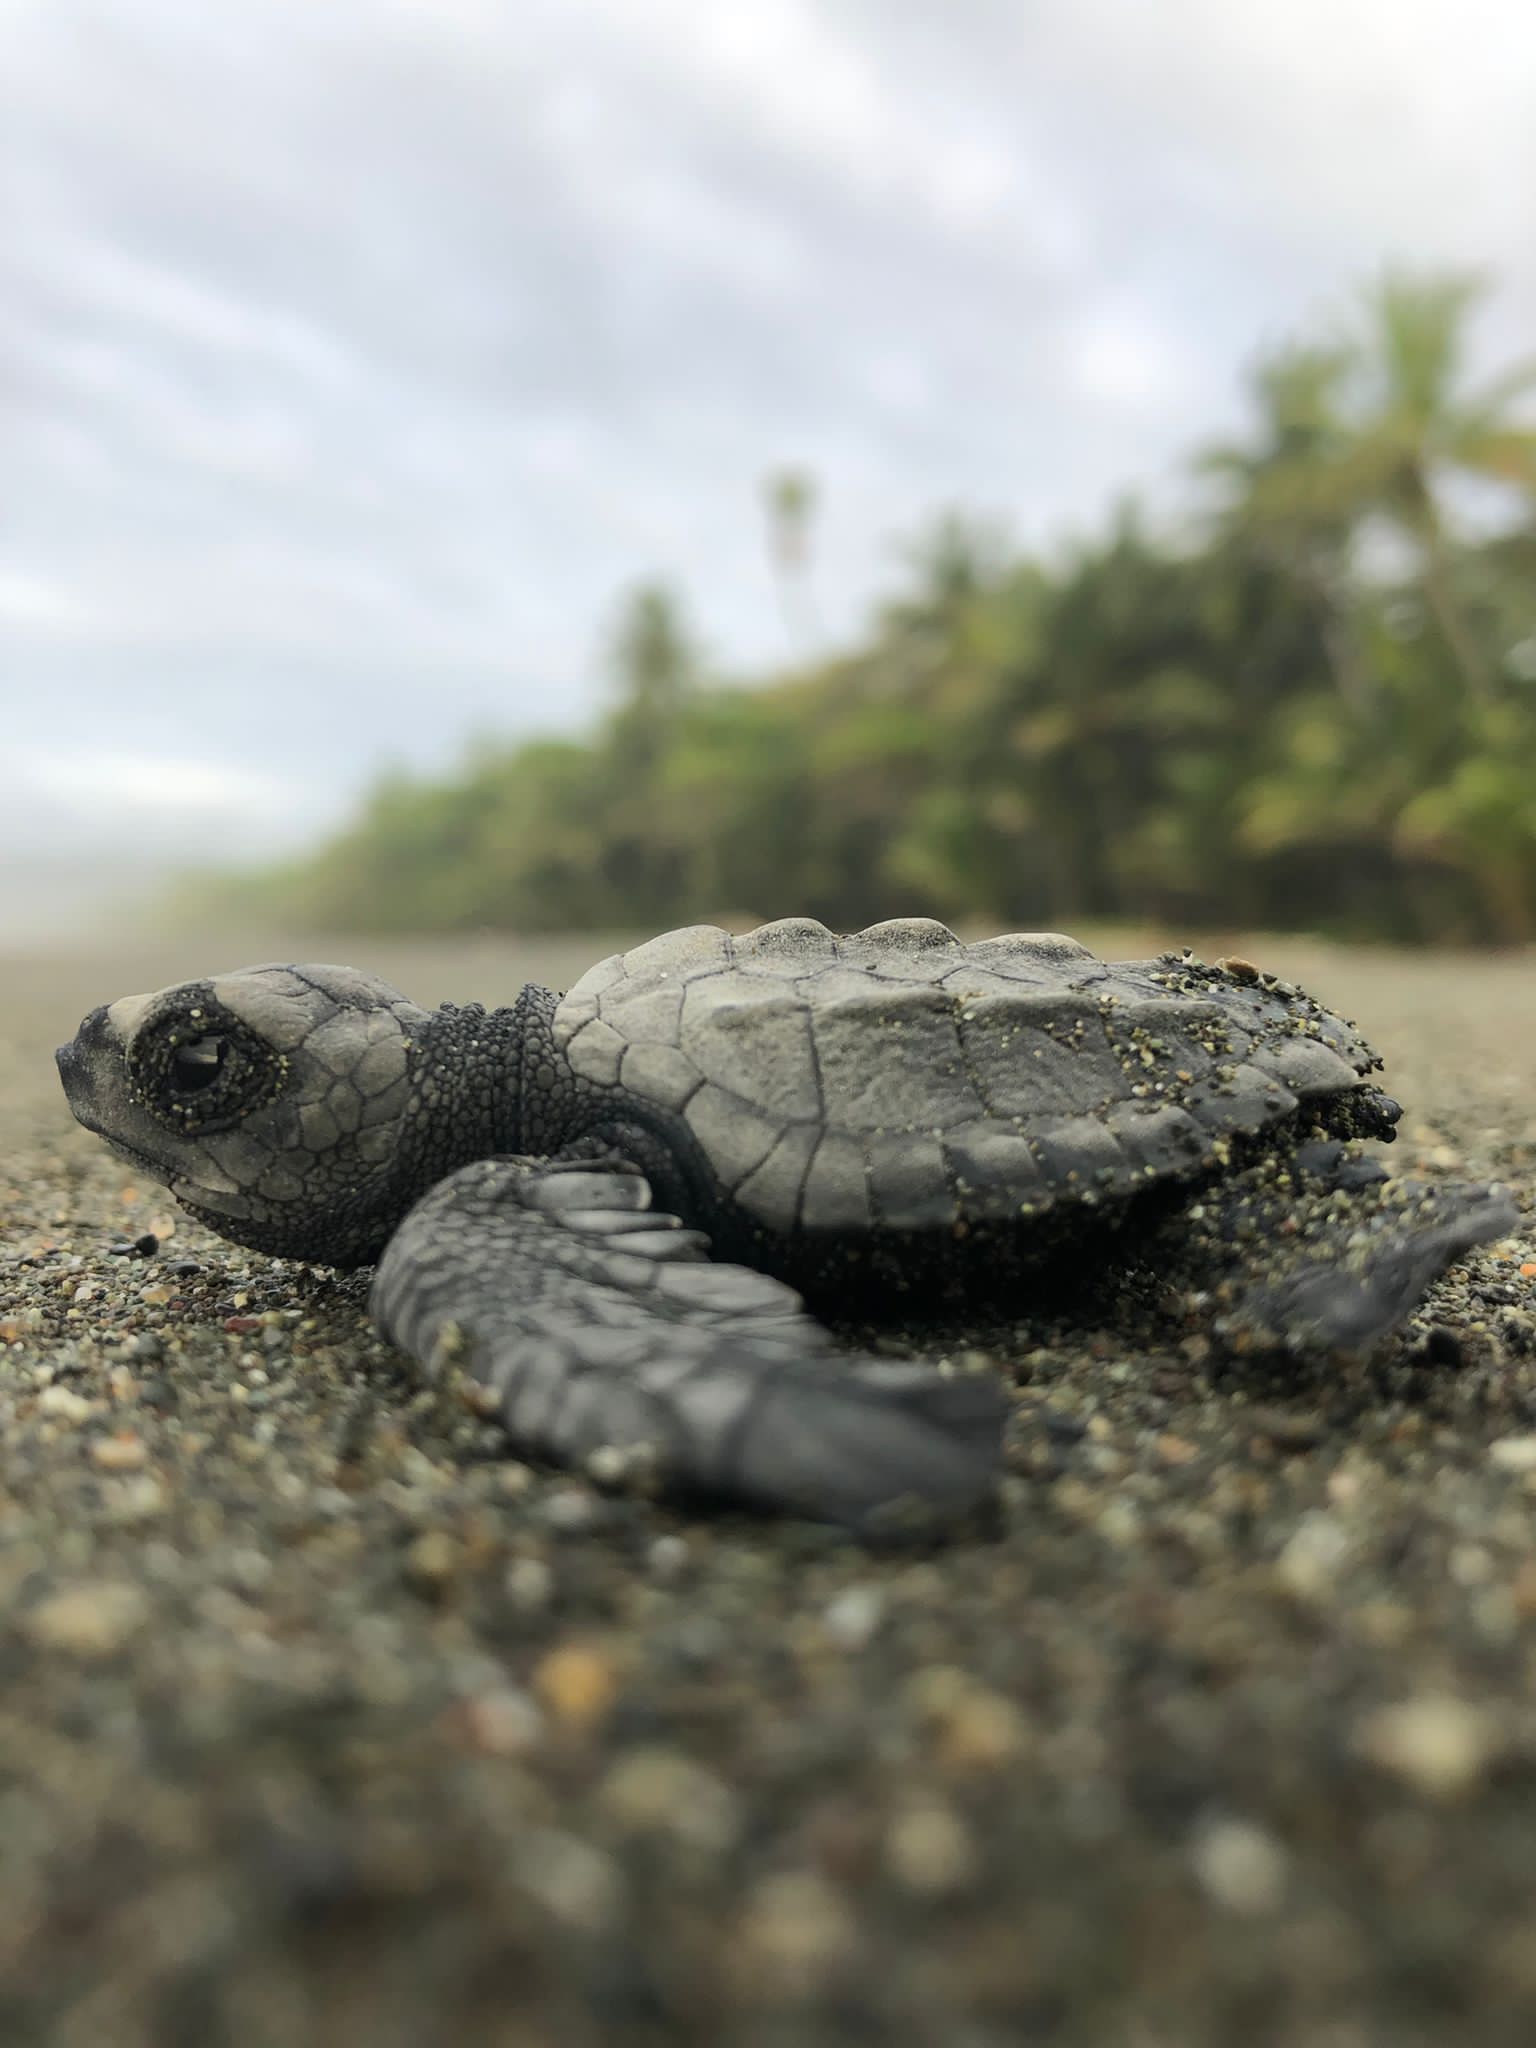 A baby turtle is laying on the ground - Sea turtle